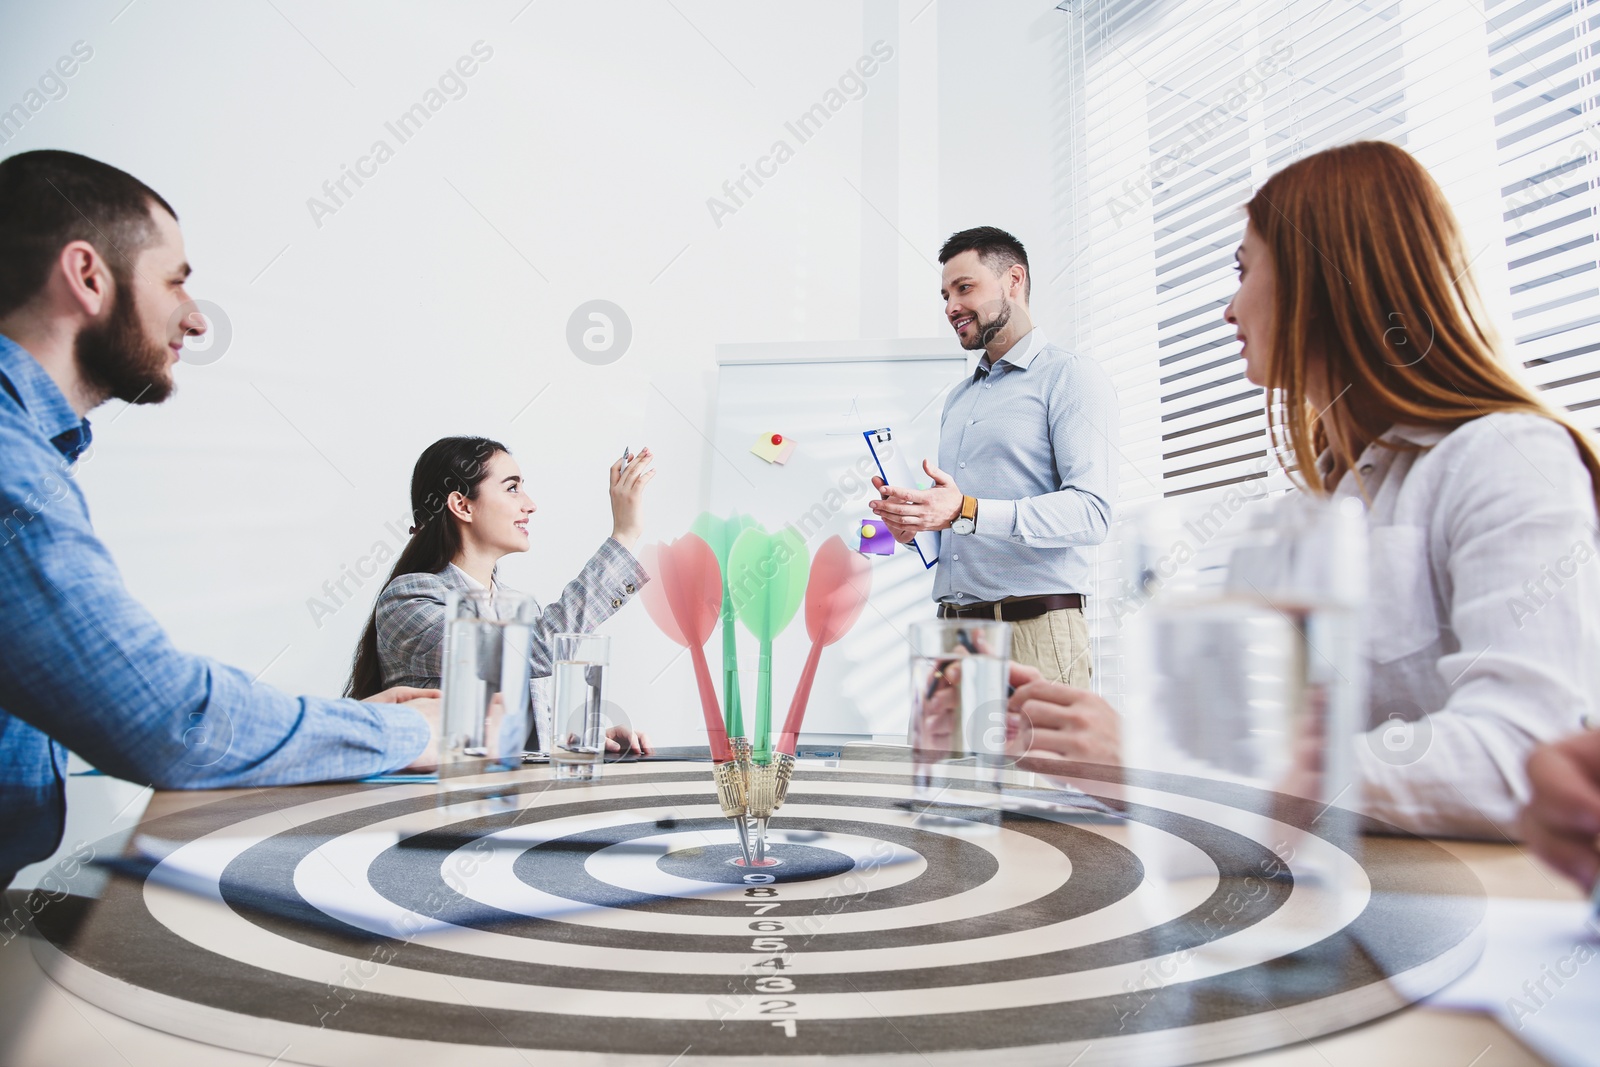 Image of People having business meeting and dart board with arrows. Double exposure